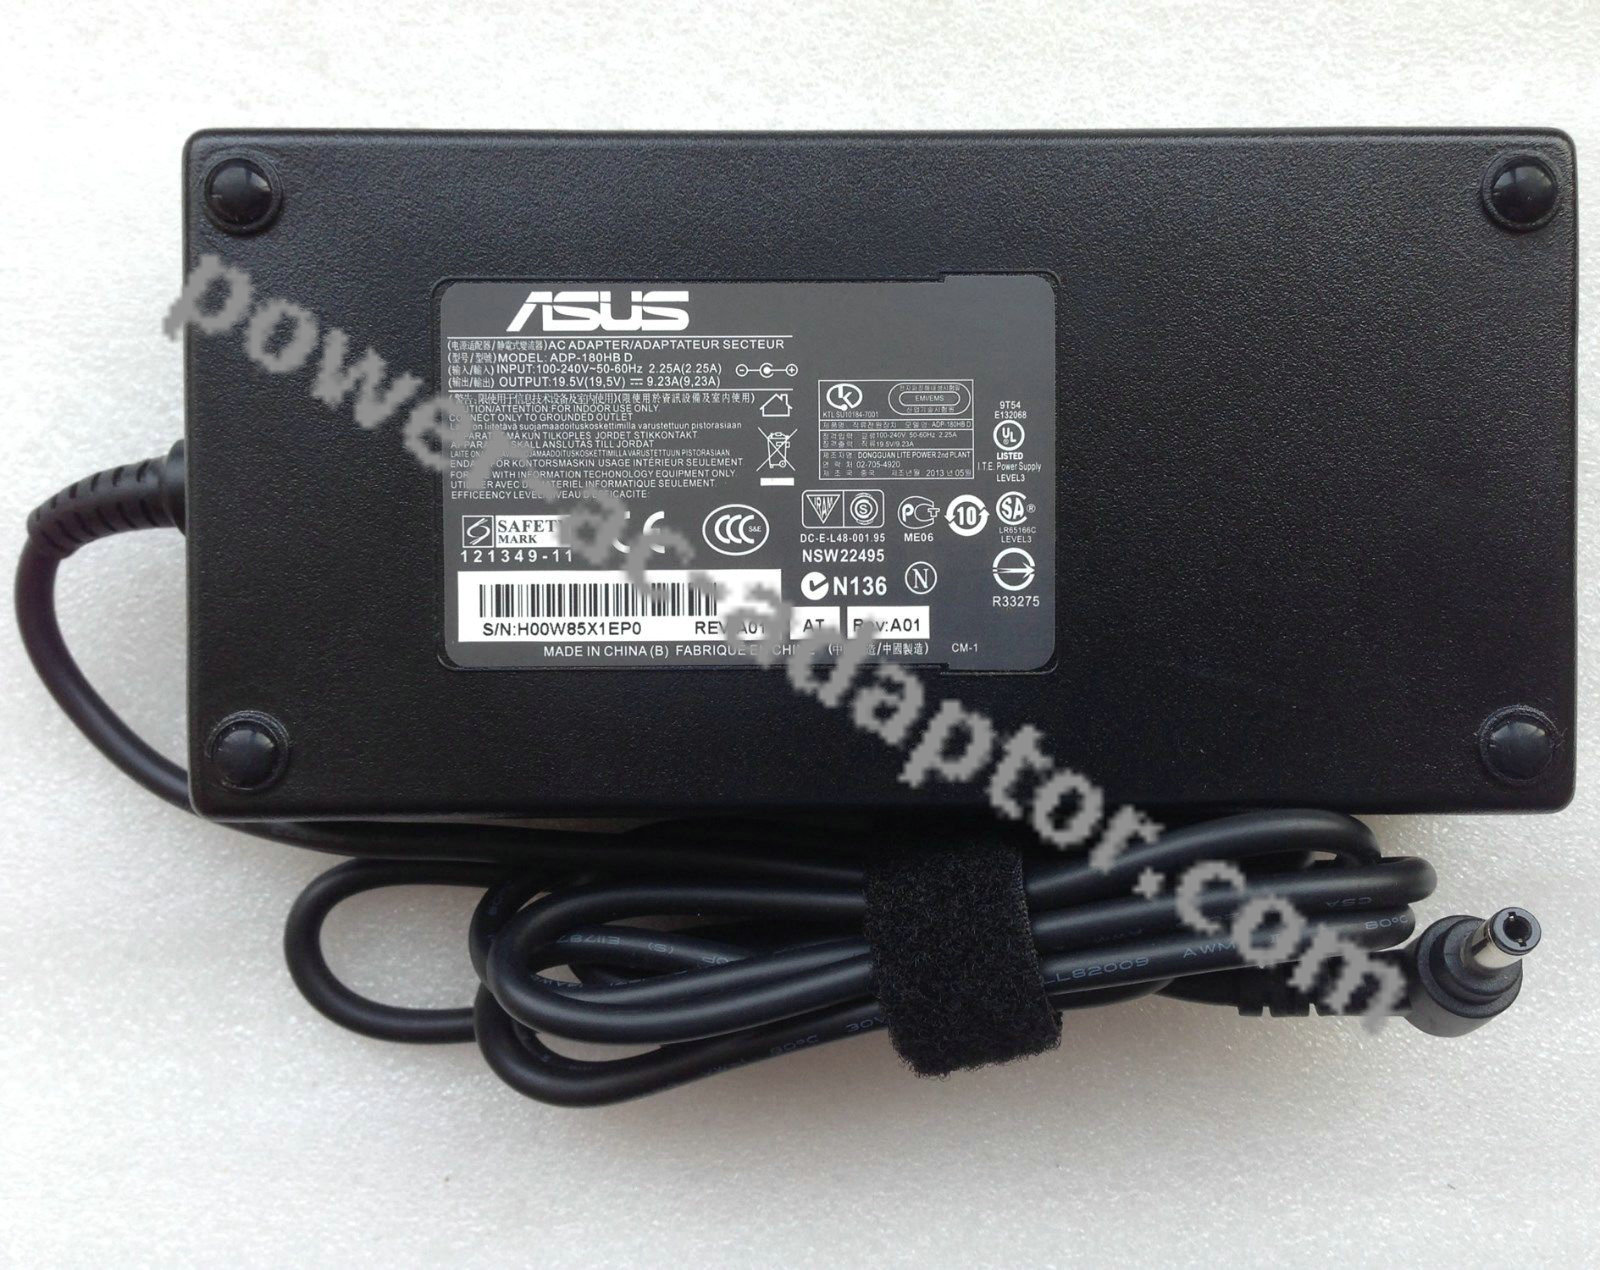 180W 19.5V 9.23A AC Adapter for Asus ROG G750JX-DB71 Gaming